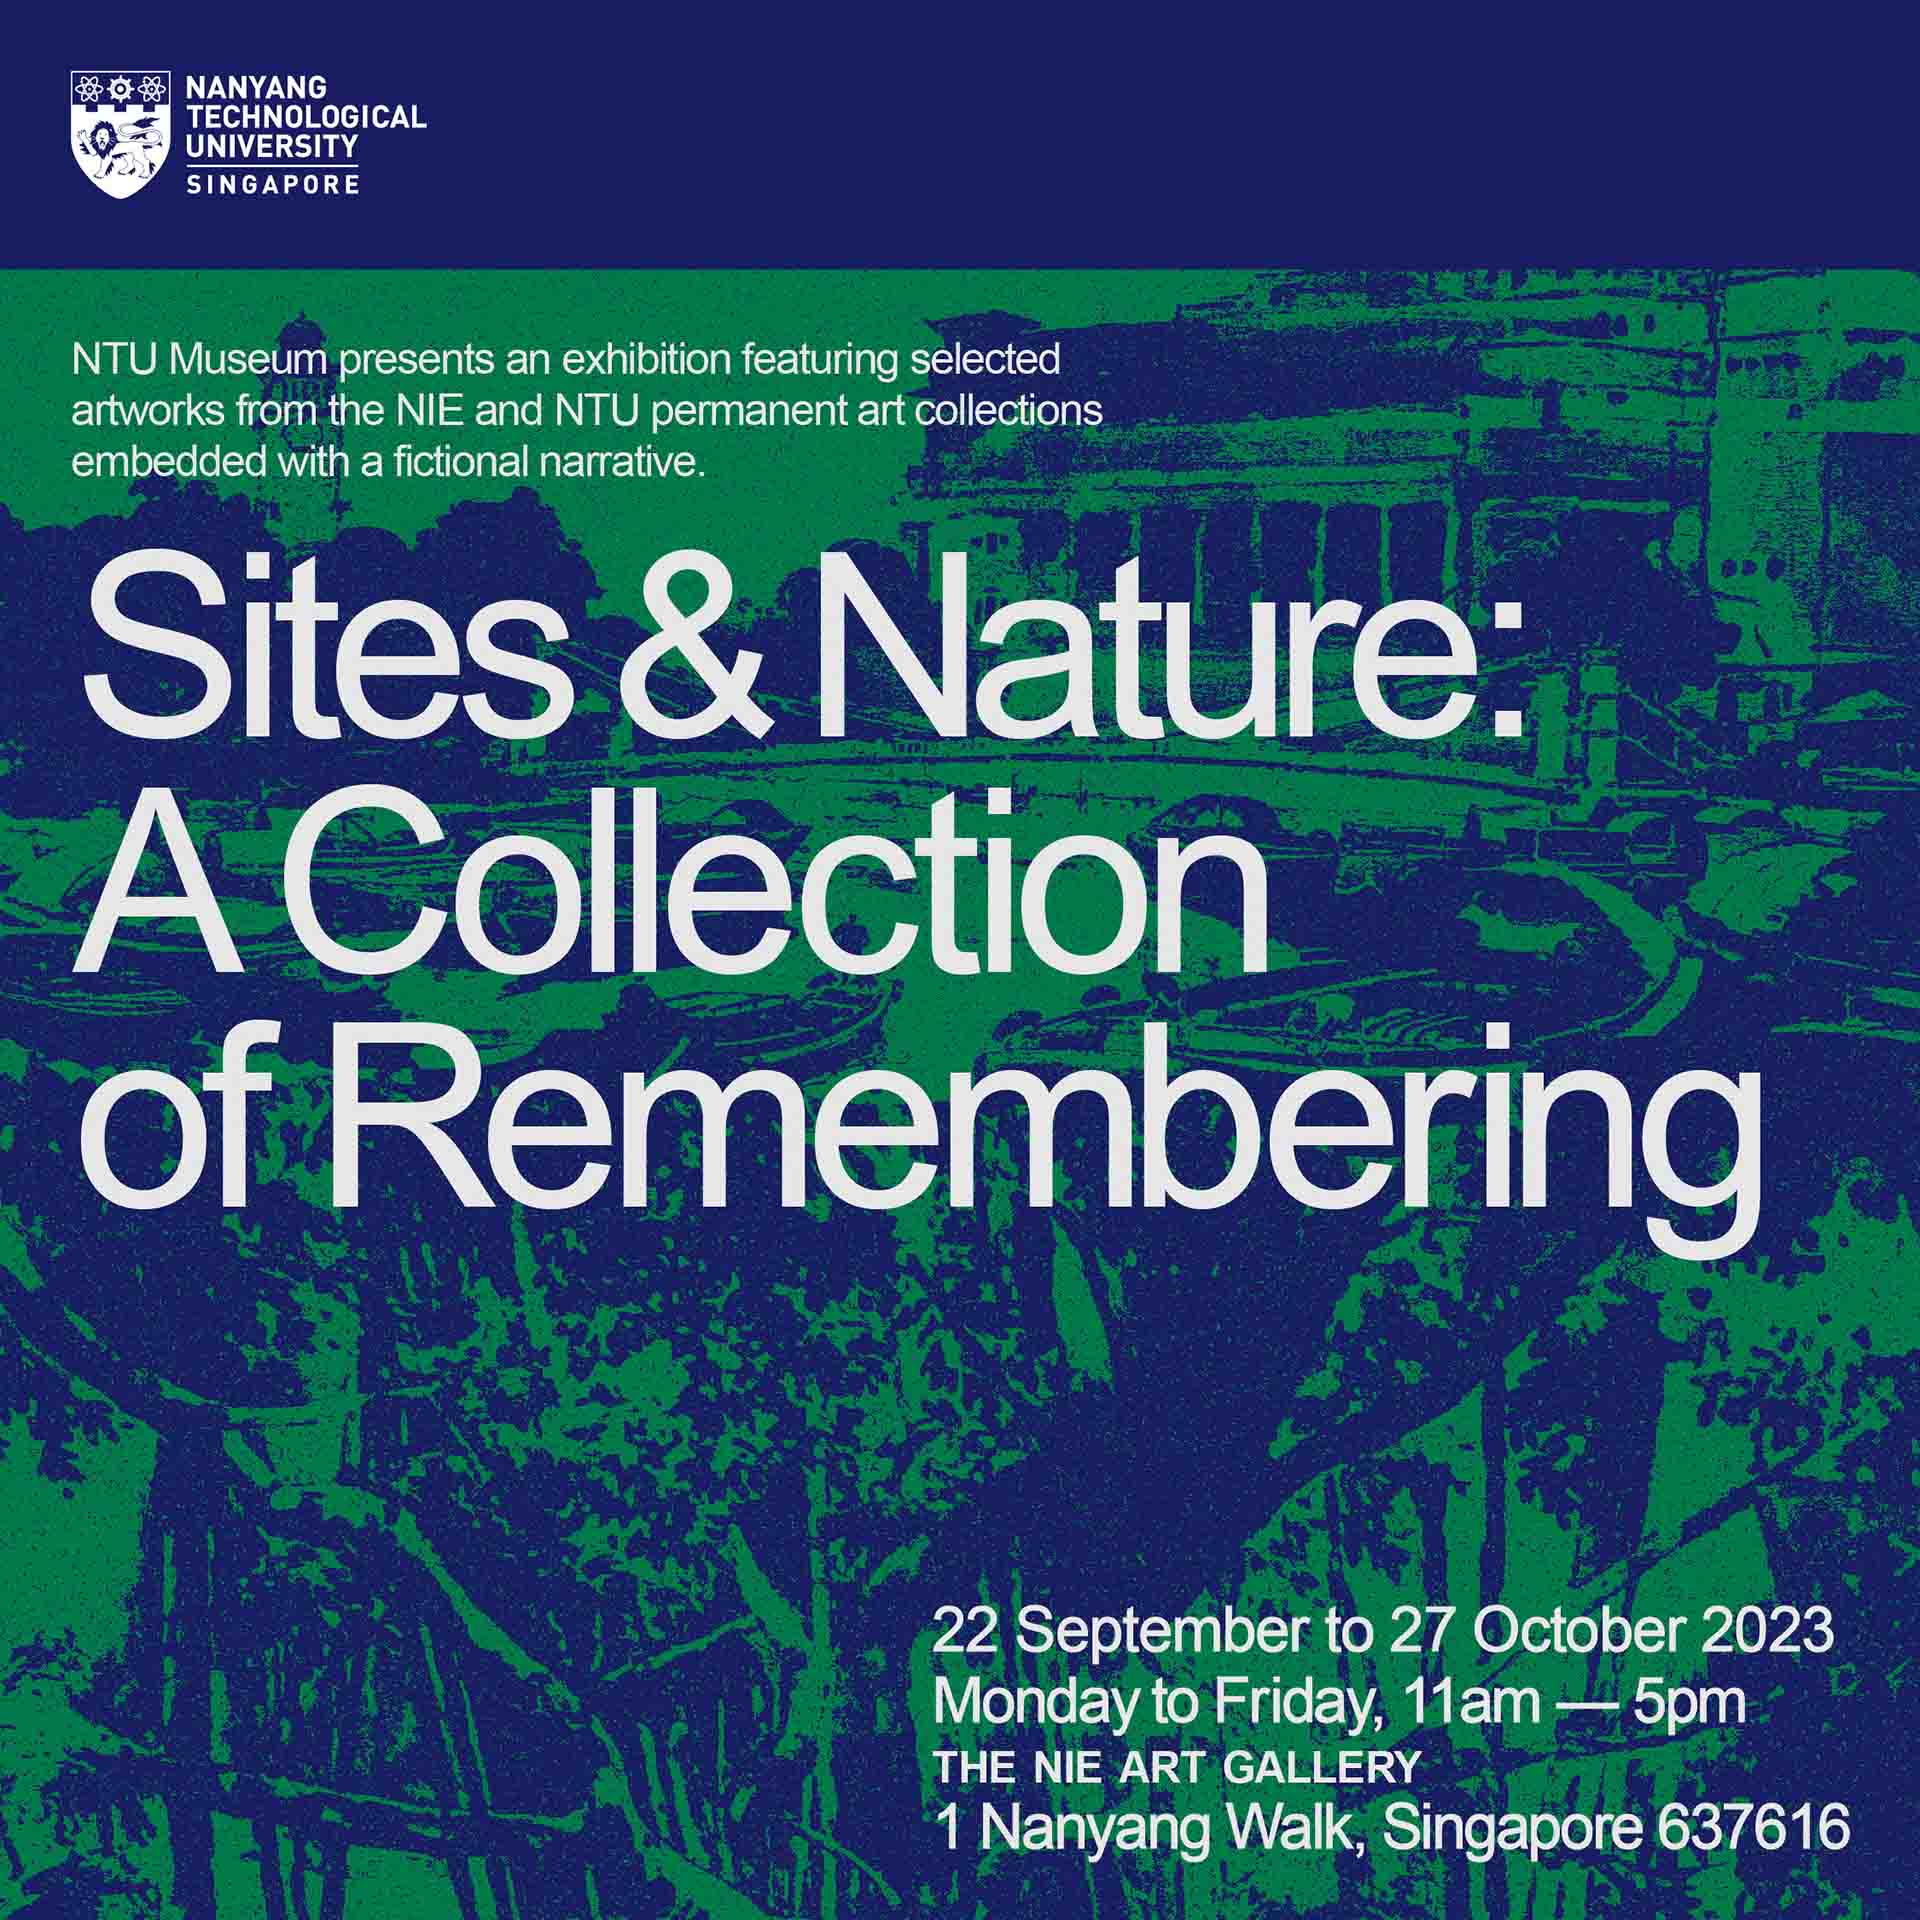 Keyart for NTU Museum exhibition - Sites & Nature: A Collection of Remembering